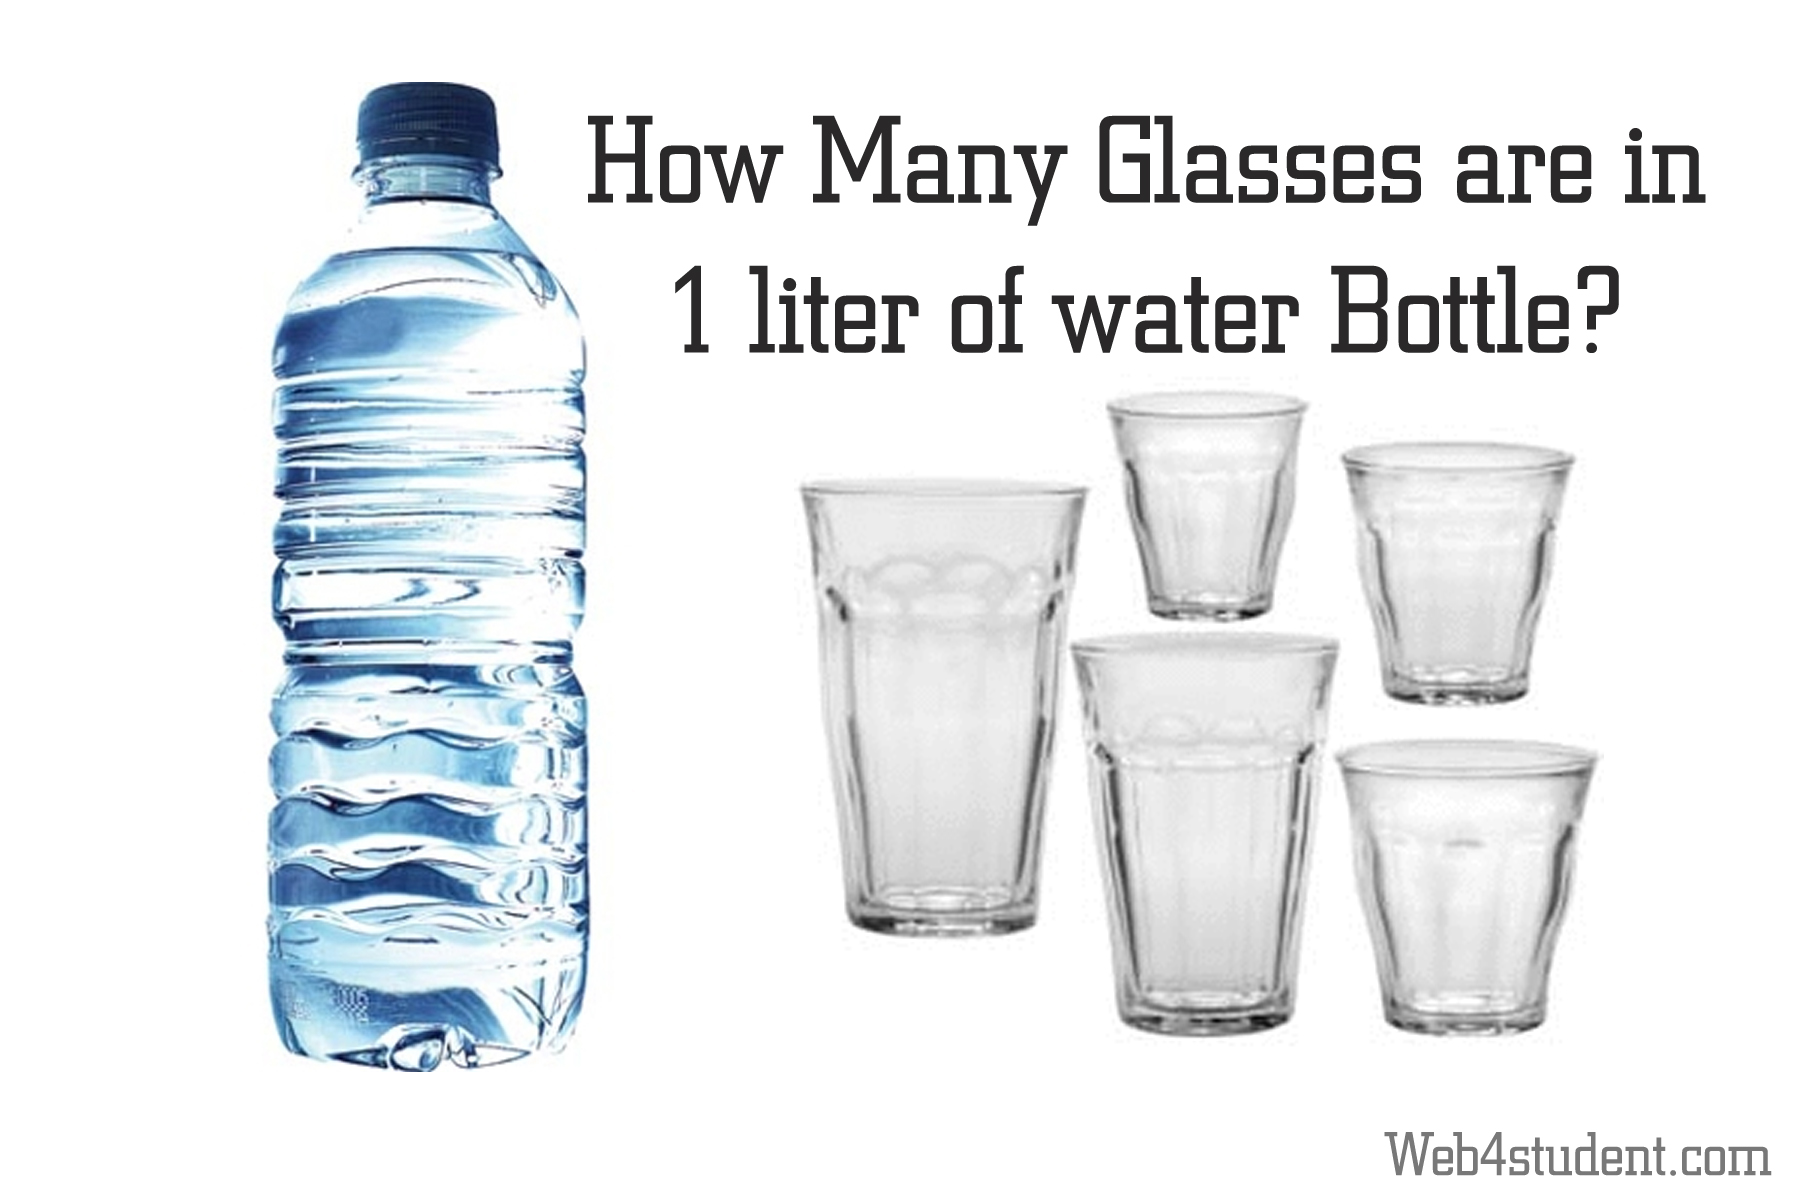 How Many Glasses are in 1 liter of water Bottle?